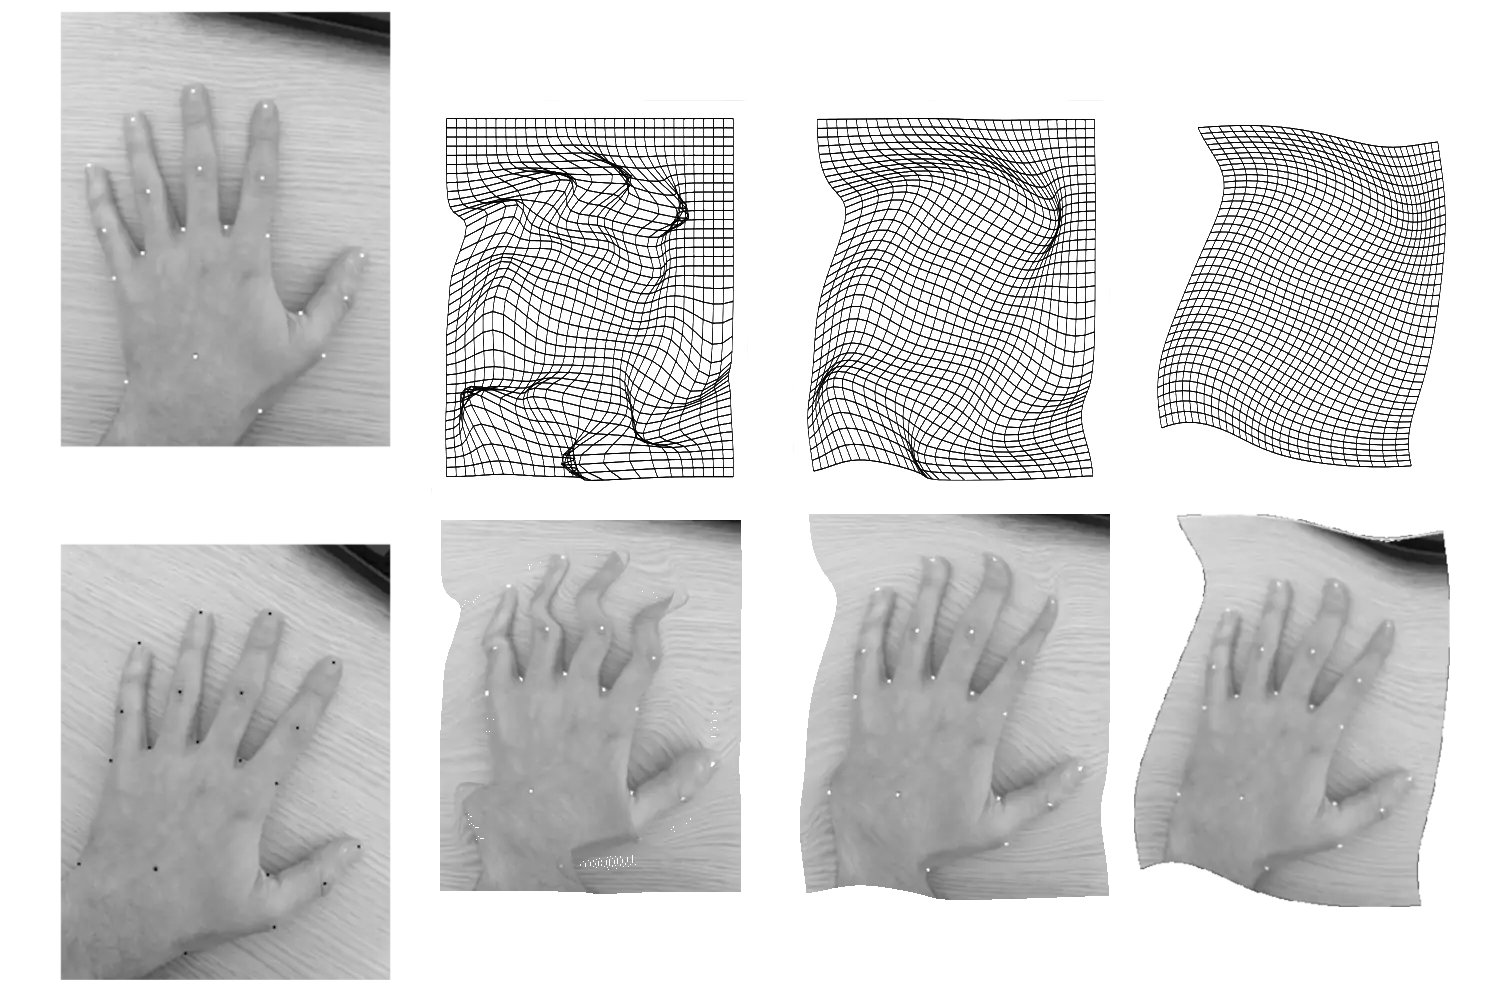 Example of small-deformation based registration of a hand